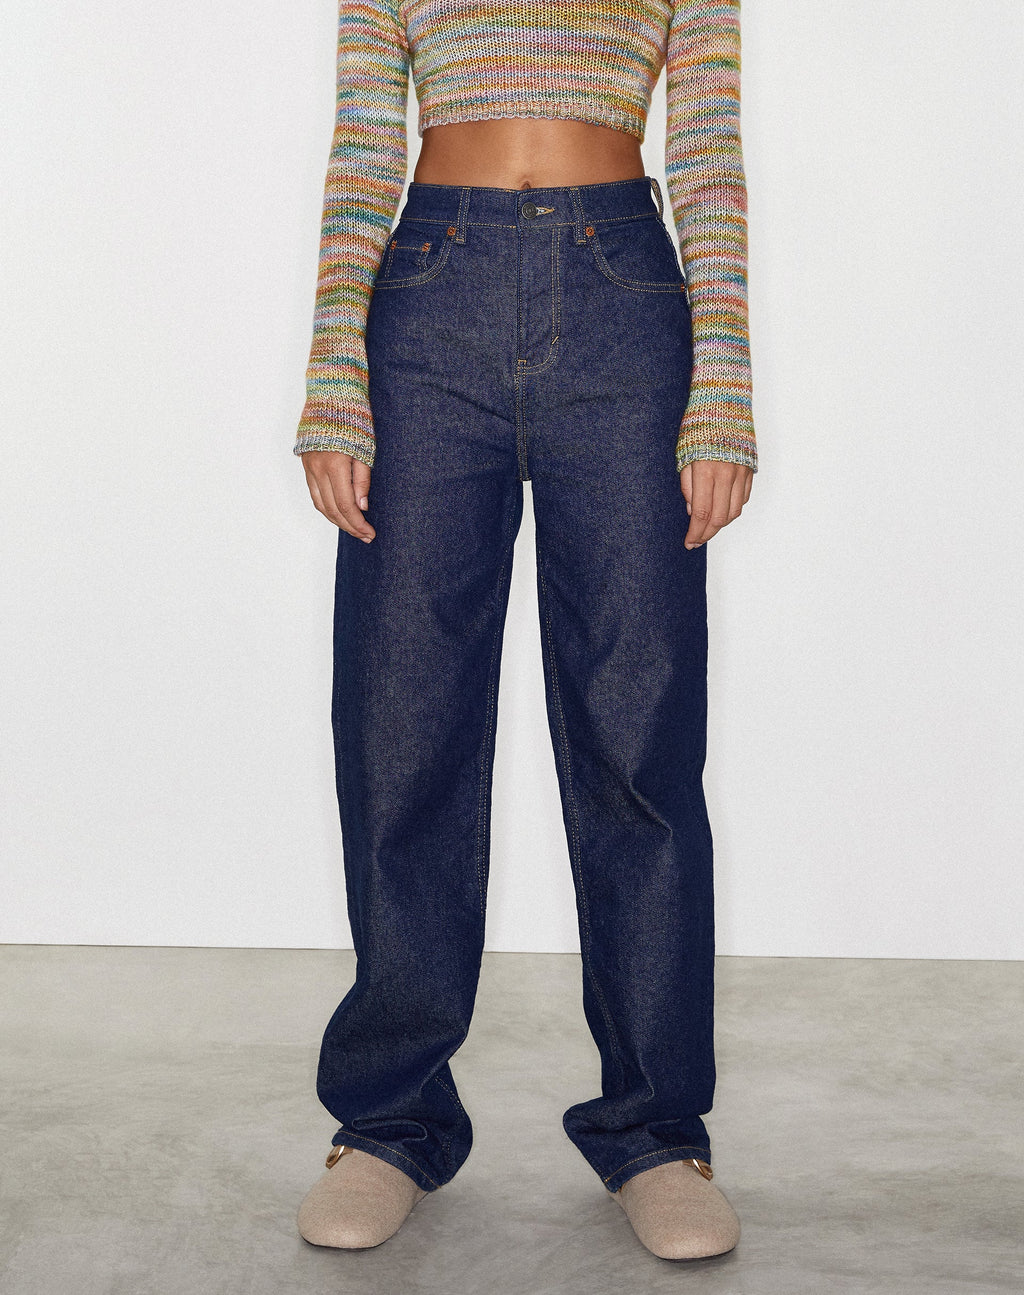 Parallel Jeans in Rinse Blue Wash